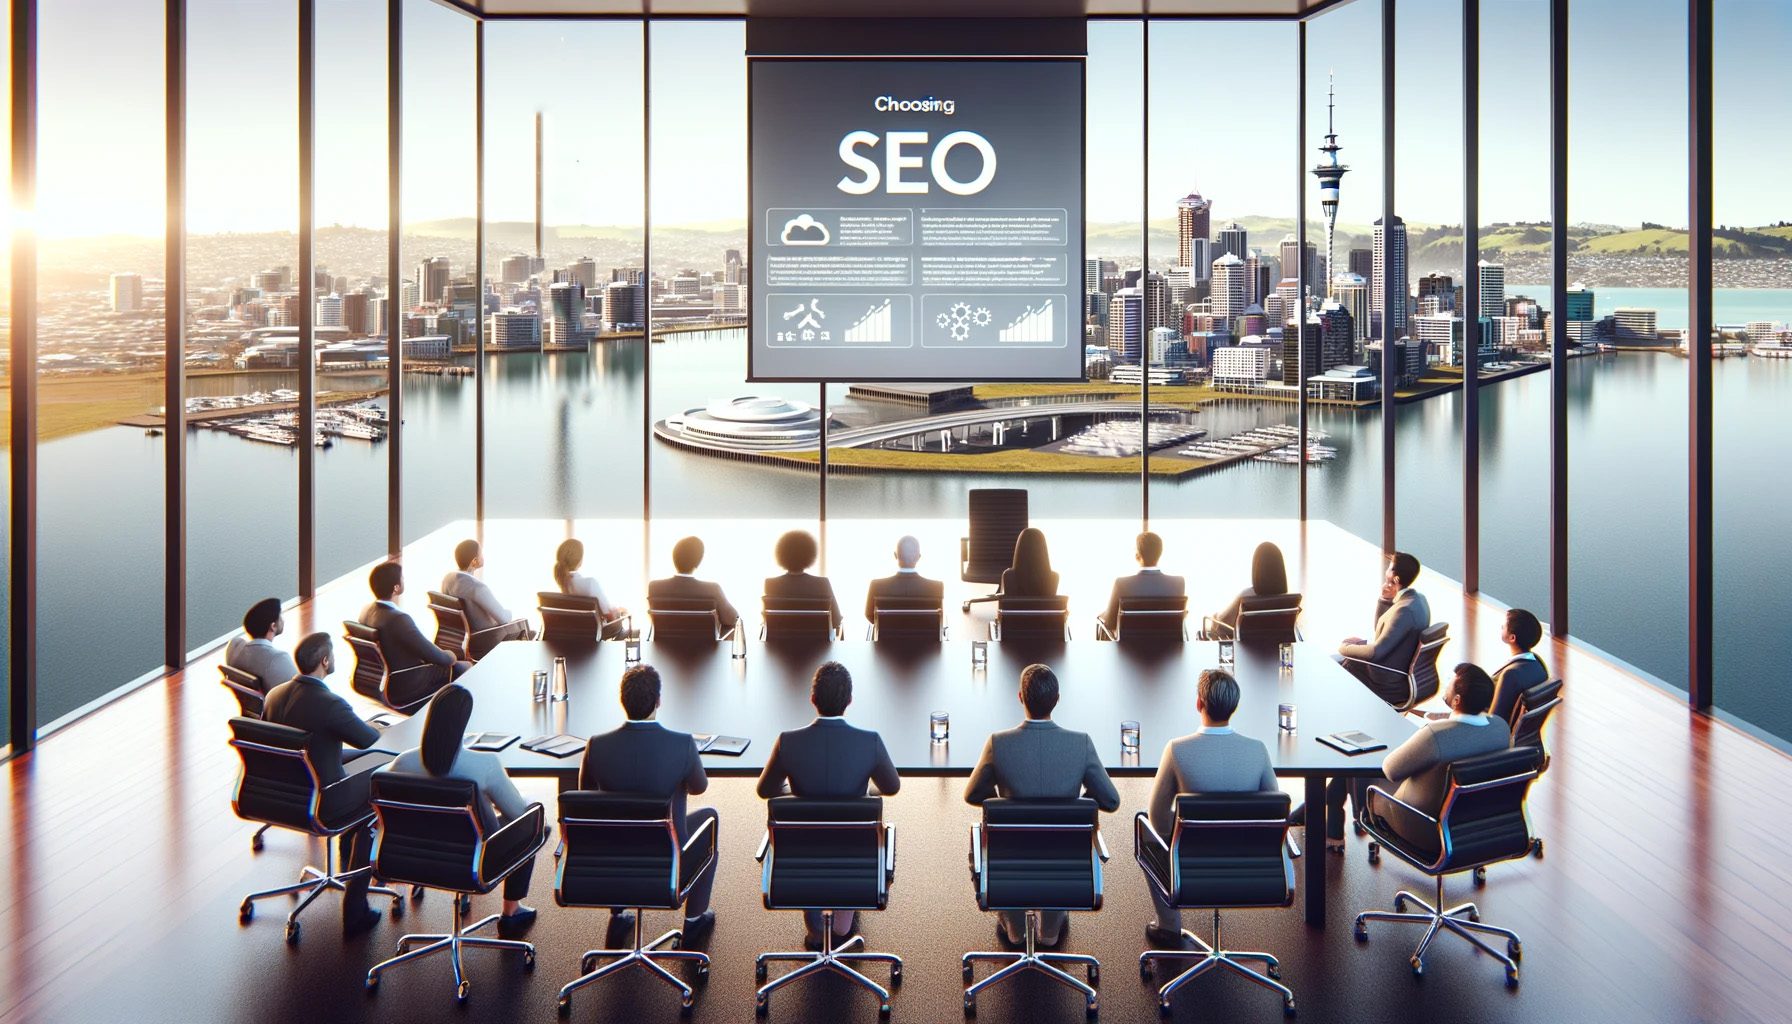 Elevate your brand in Auckland's digital landscape with cutting-edge SEO strategies from top local agencies.